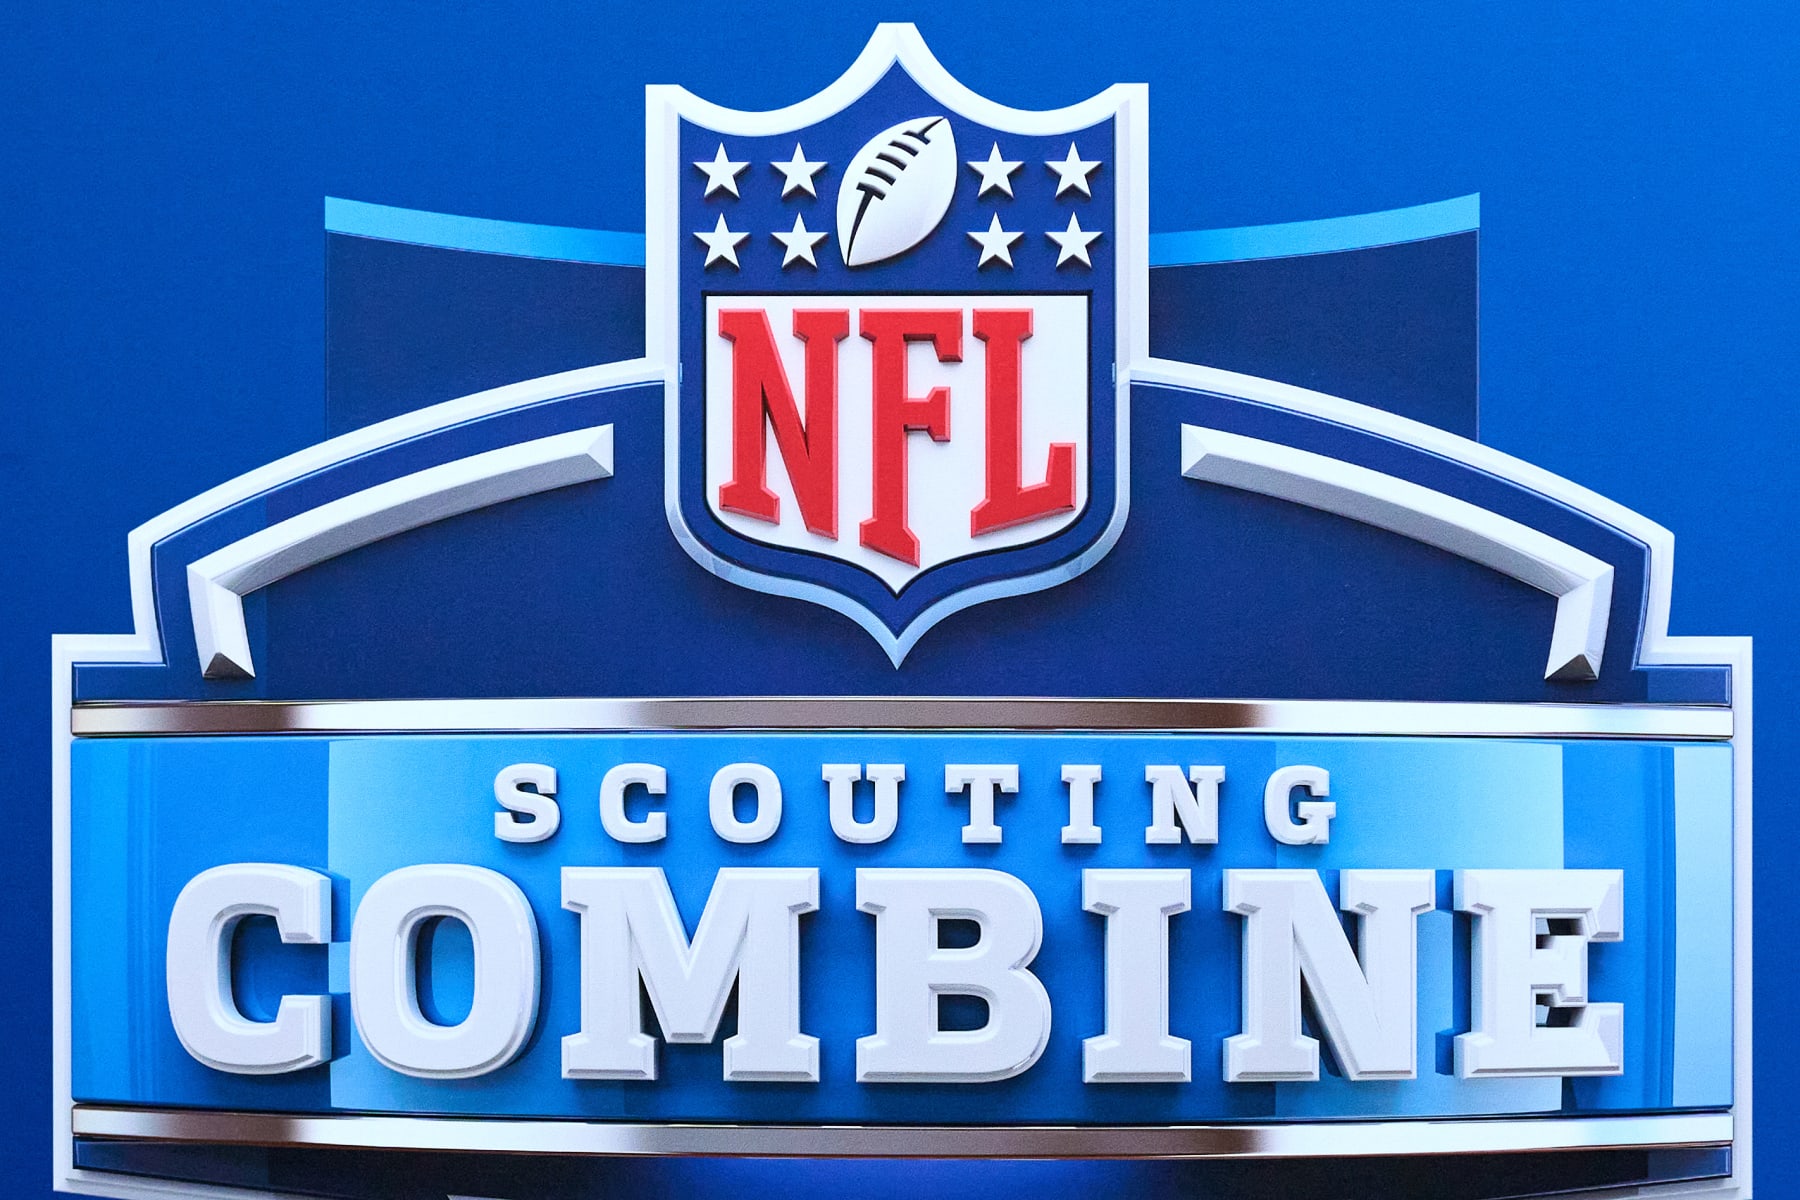 NFL draft: Biggest winners from the 2023 NFL Scouting Combine